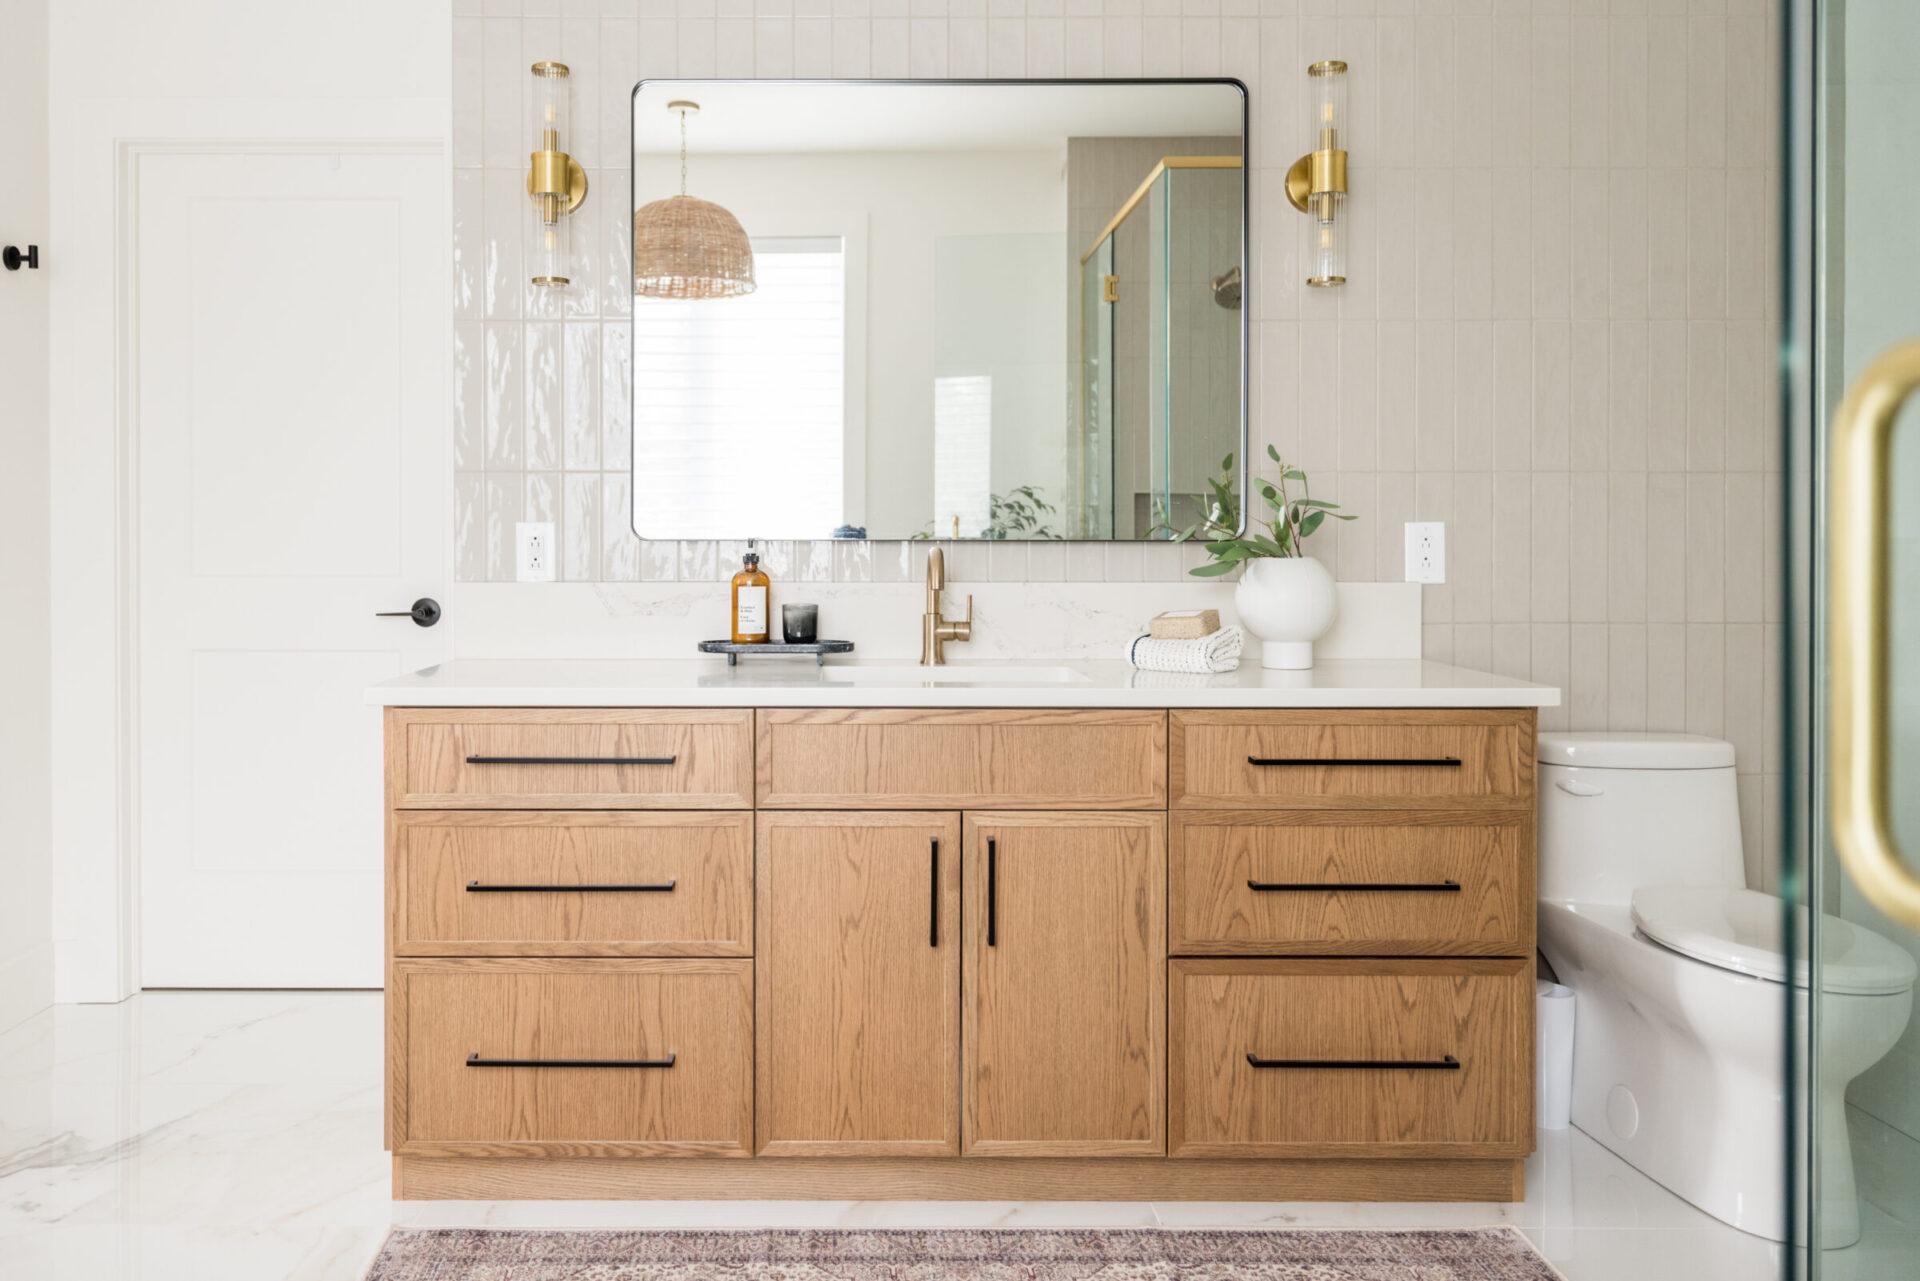 Modern bathroom interior with wooden vanity cabinet, large mirror, brass fixtures, white countertop, decorative plants, and a visible toilet area.